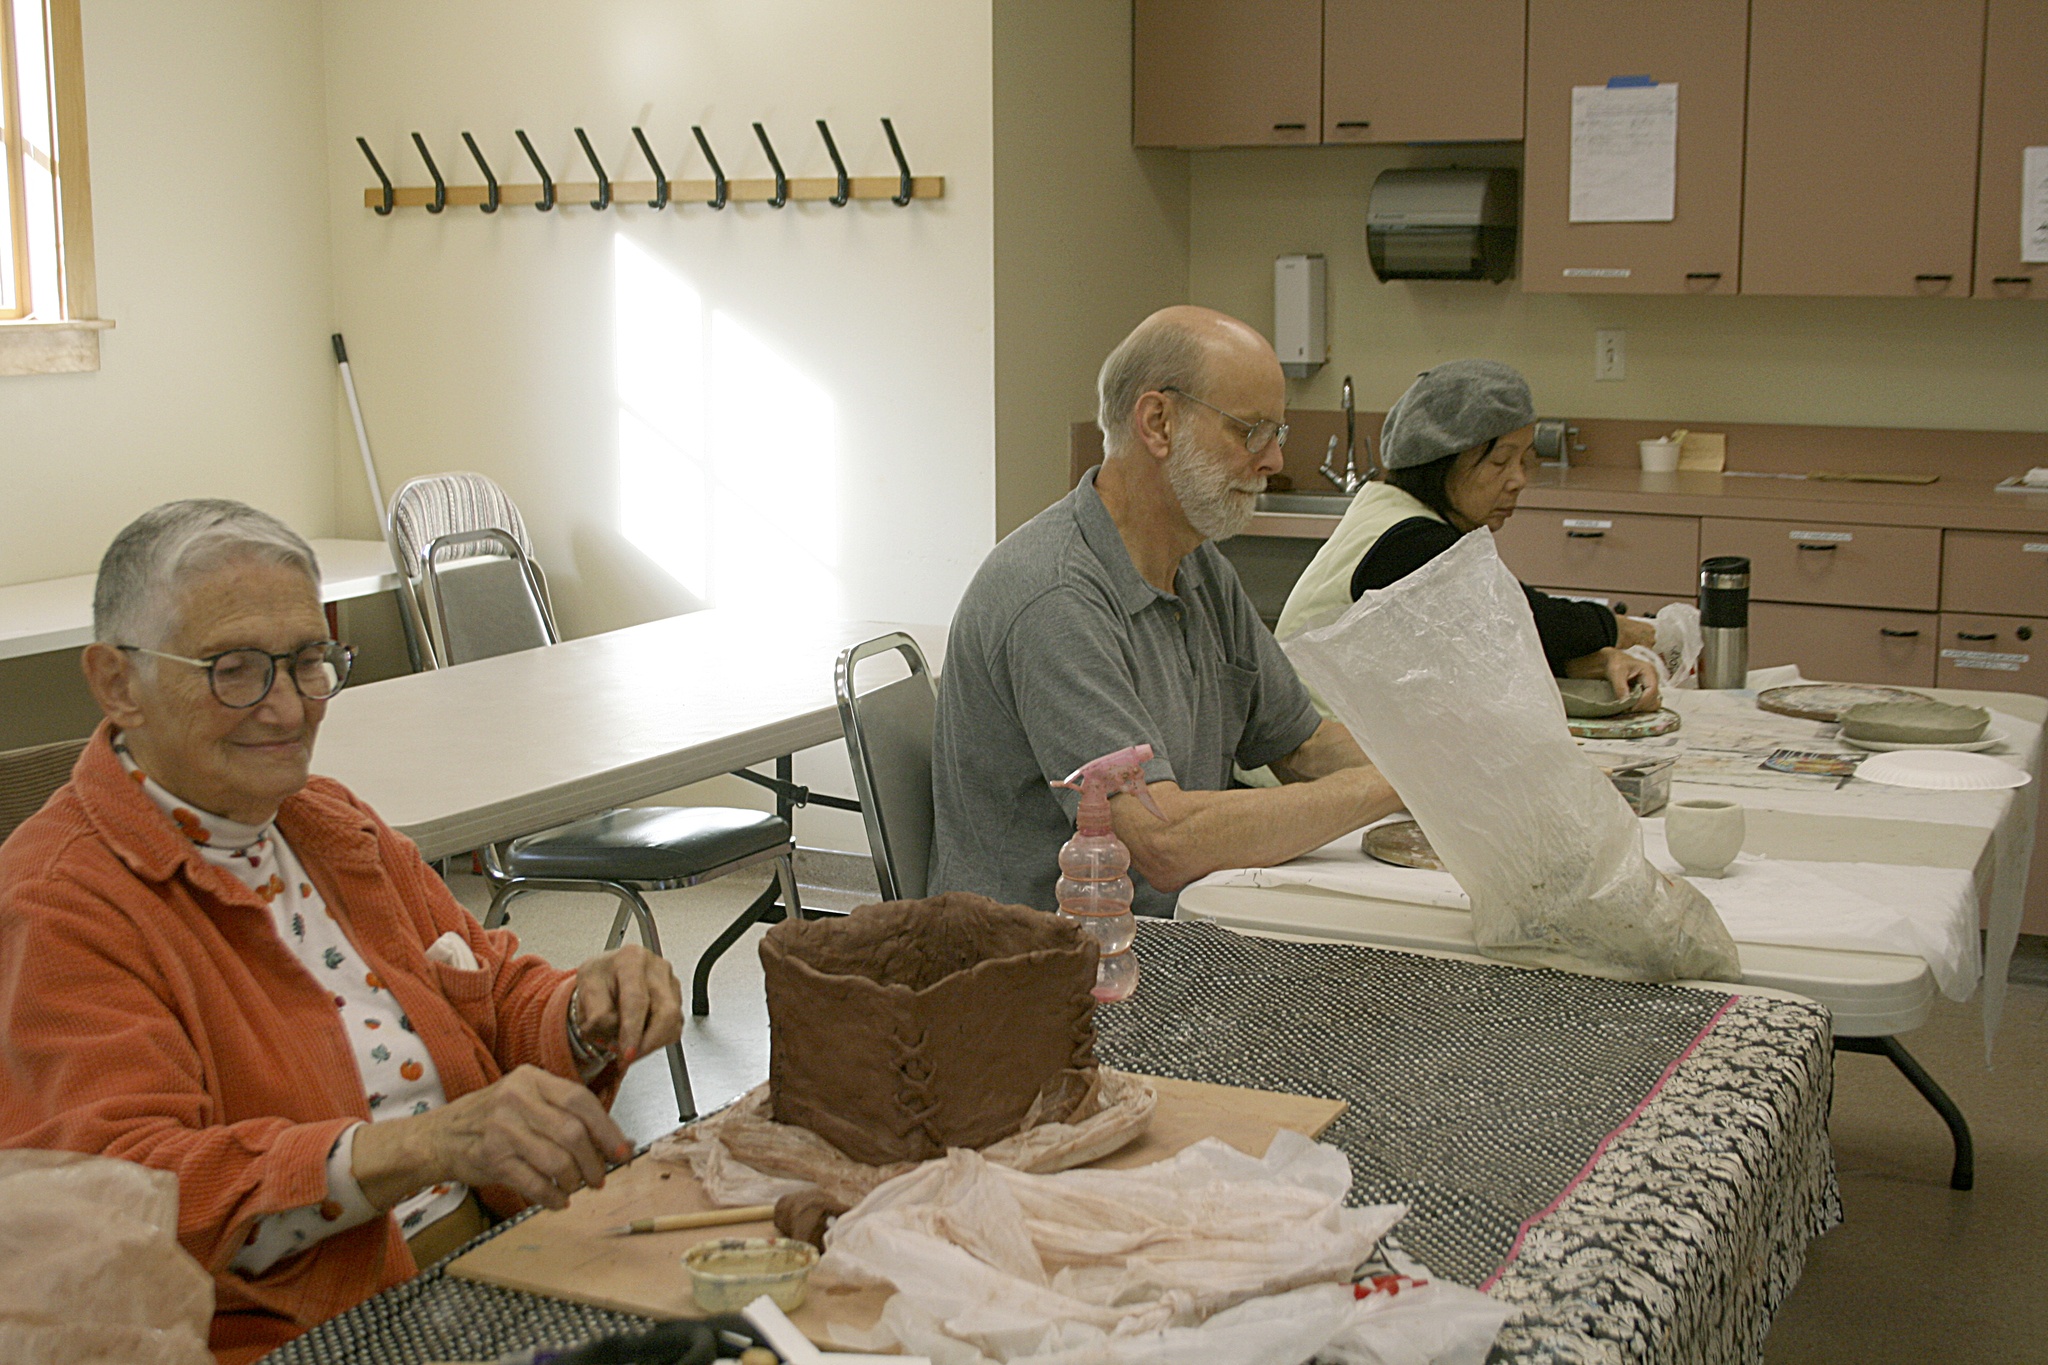 Delores Jones, John Buckingham and Annie Nininger participate in a ceramics class at the Northshore Senior Center in Bothell. CATHERINE KRUMMEY/Bothell Reporter